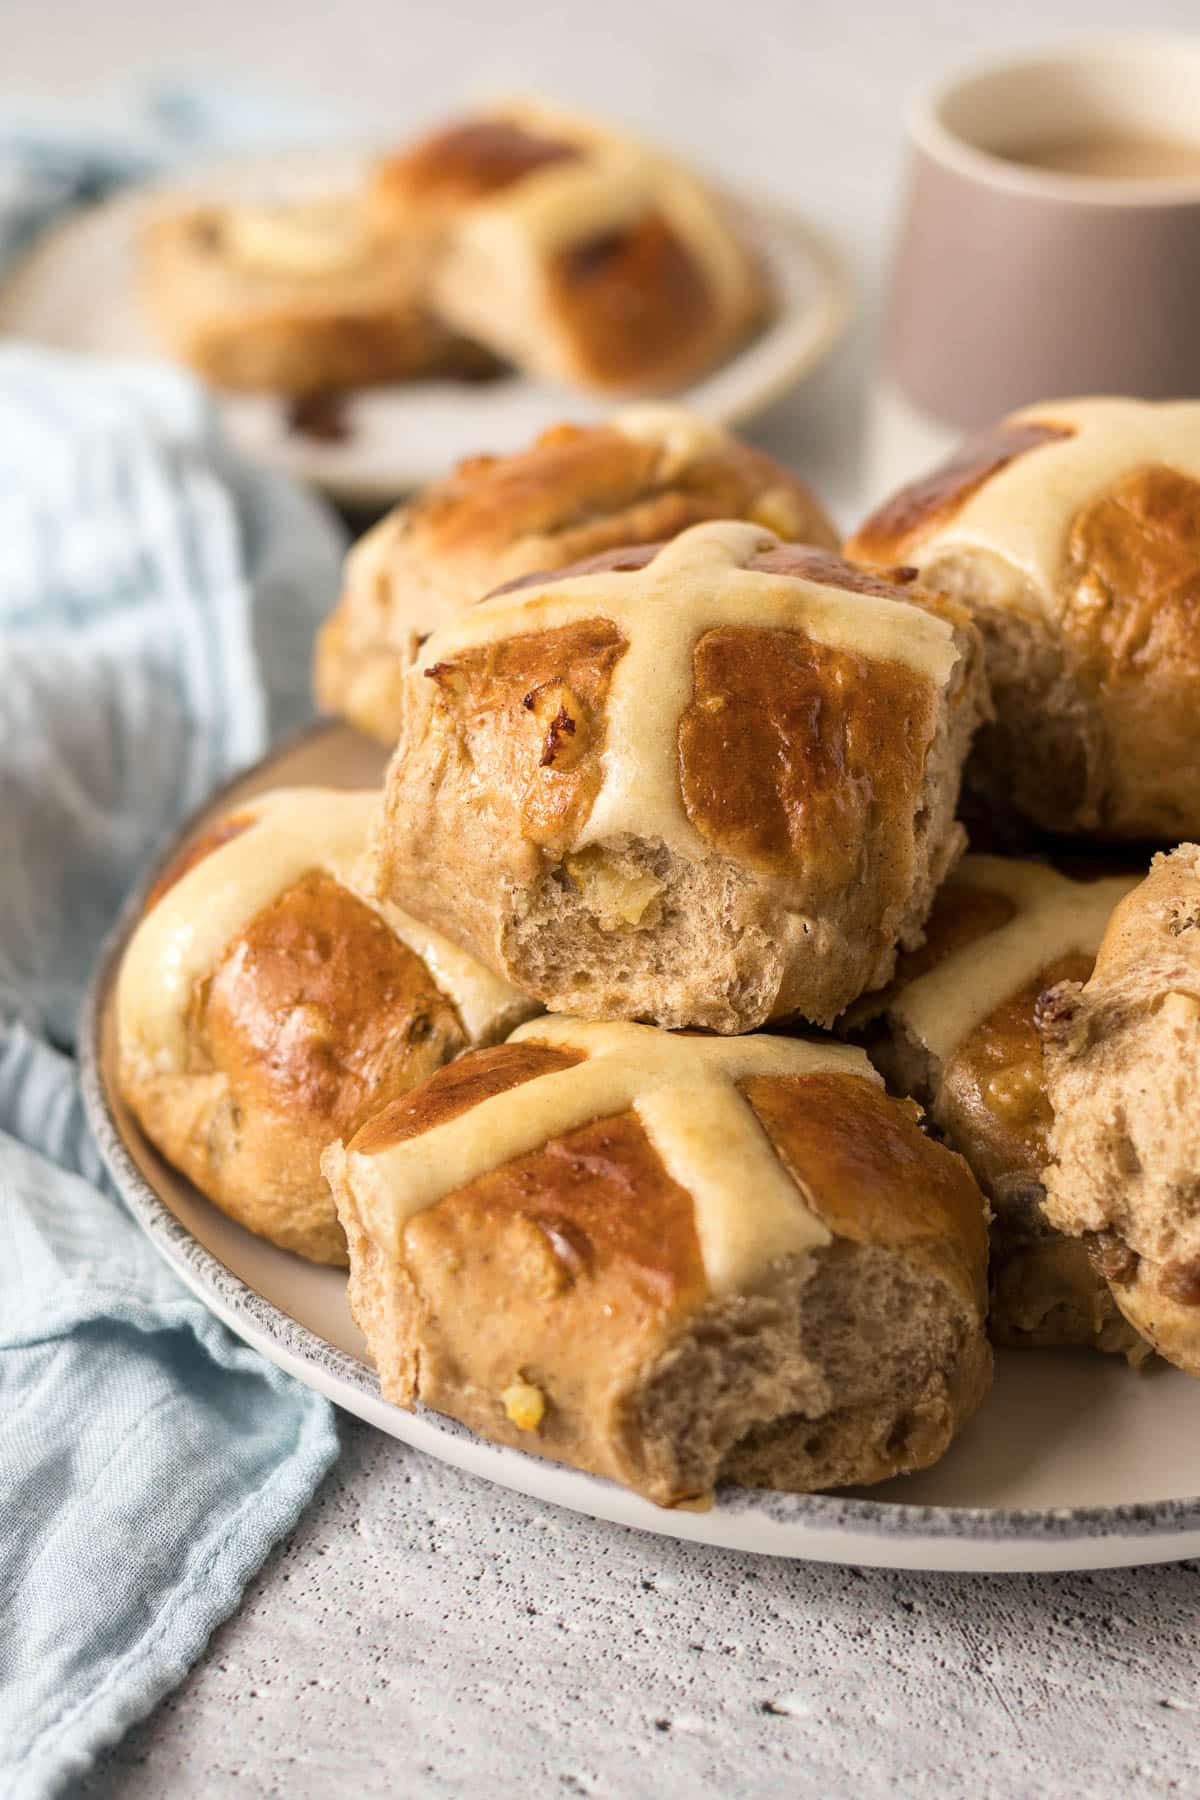 Pile of Hot Cross Buns on a Plate.